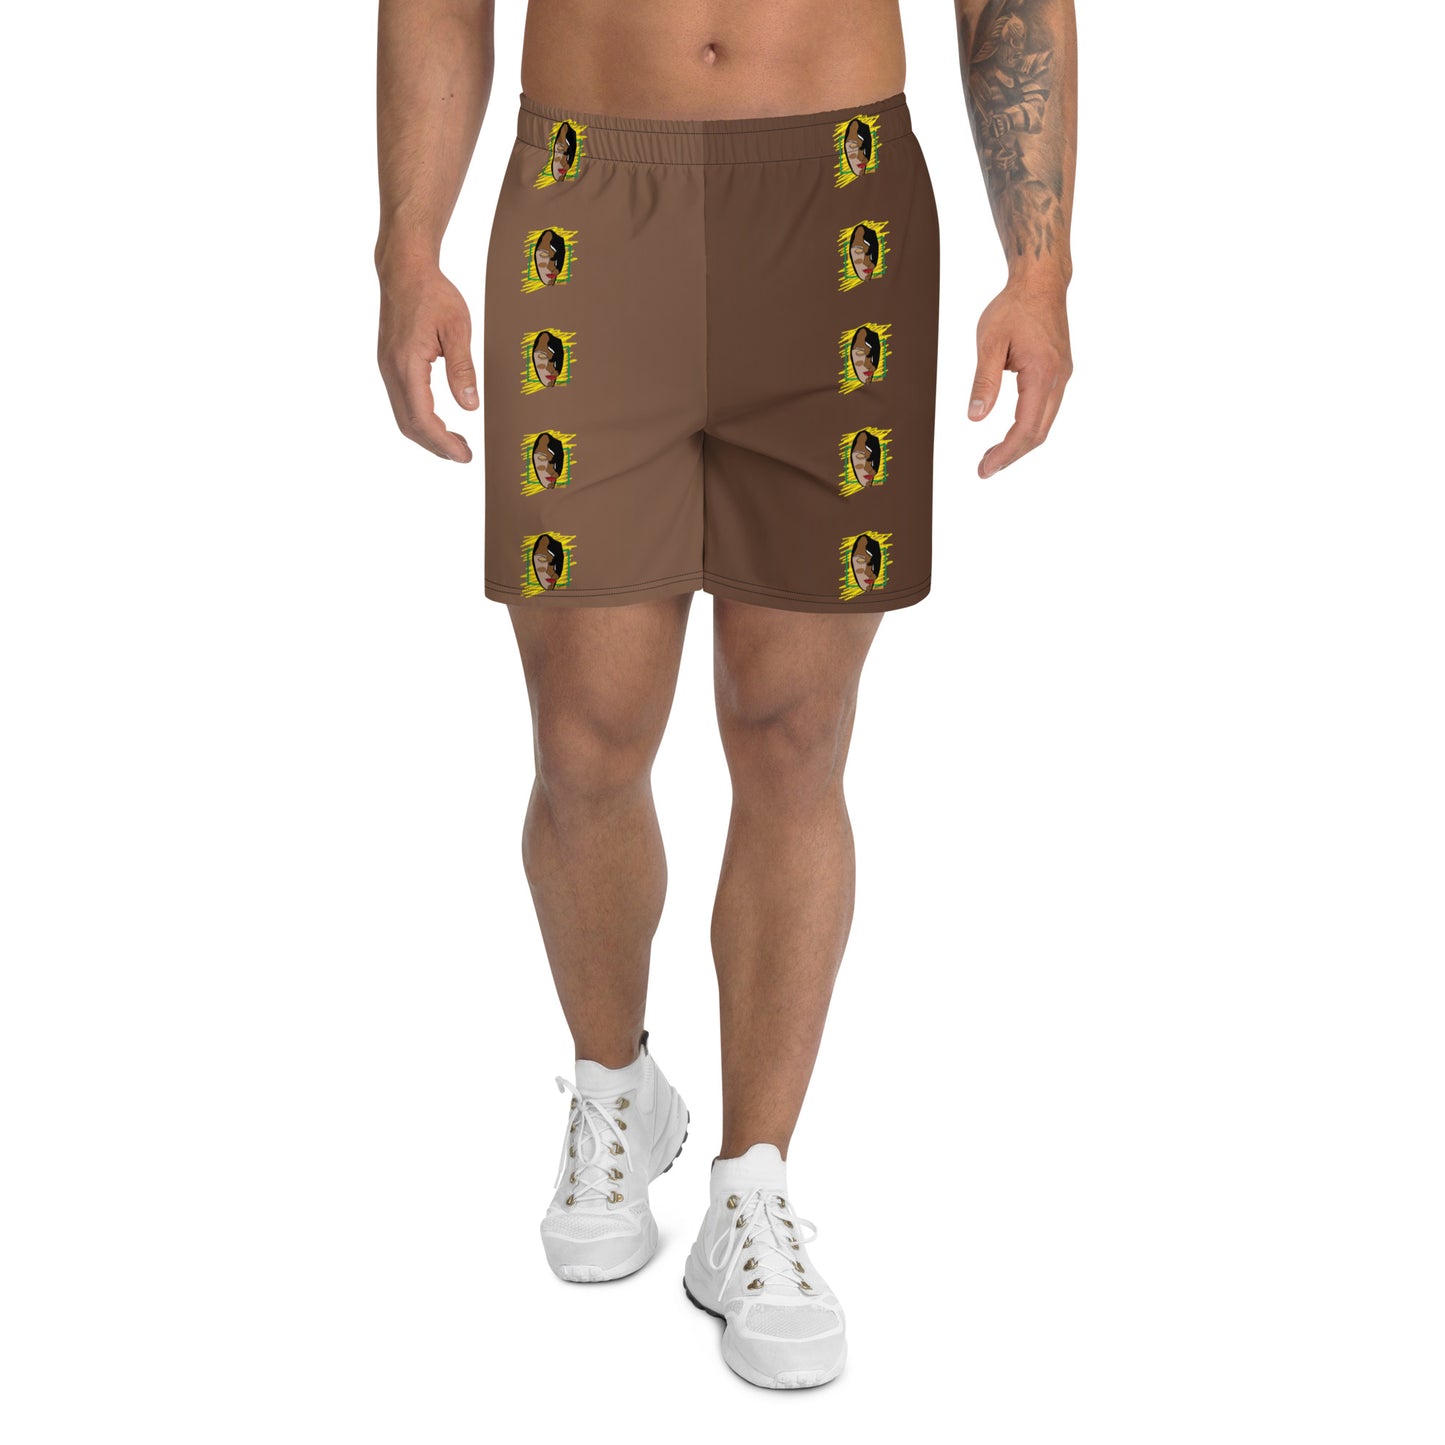 Heritage Print Nude Men's Athletic Long Shorts